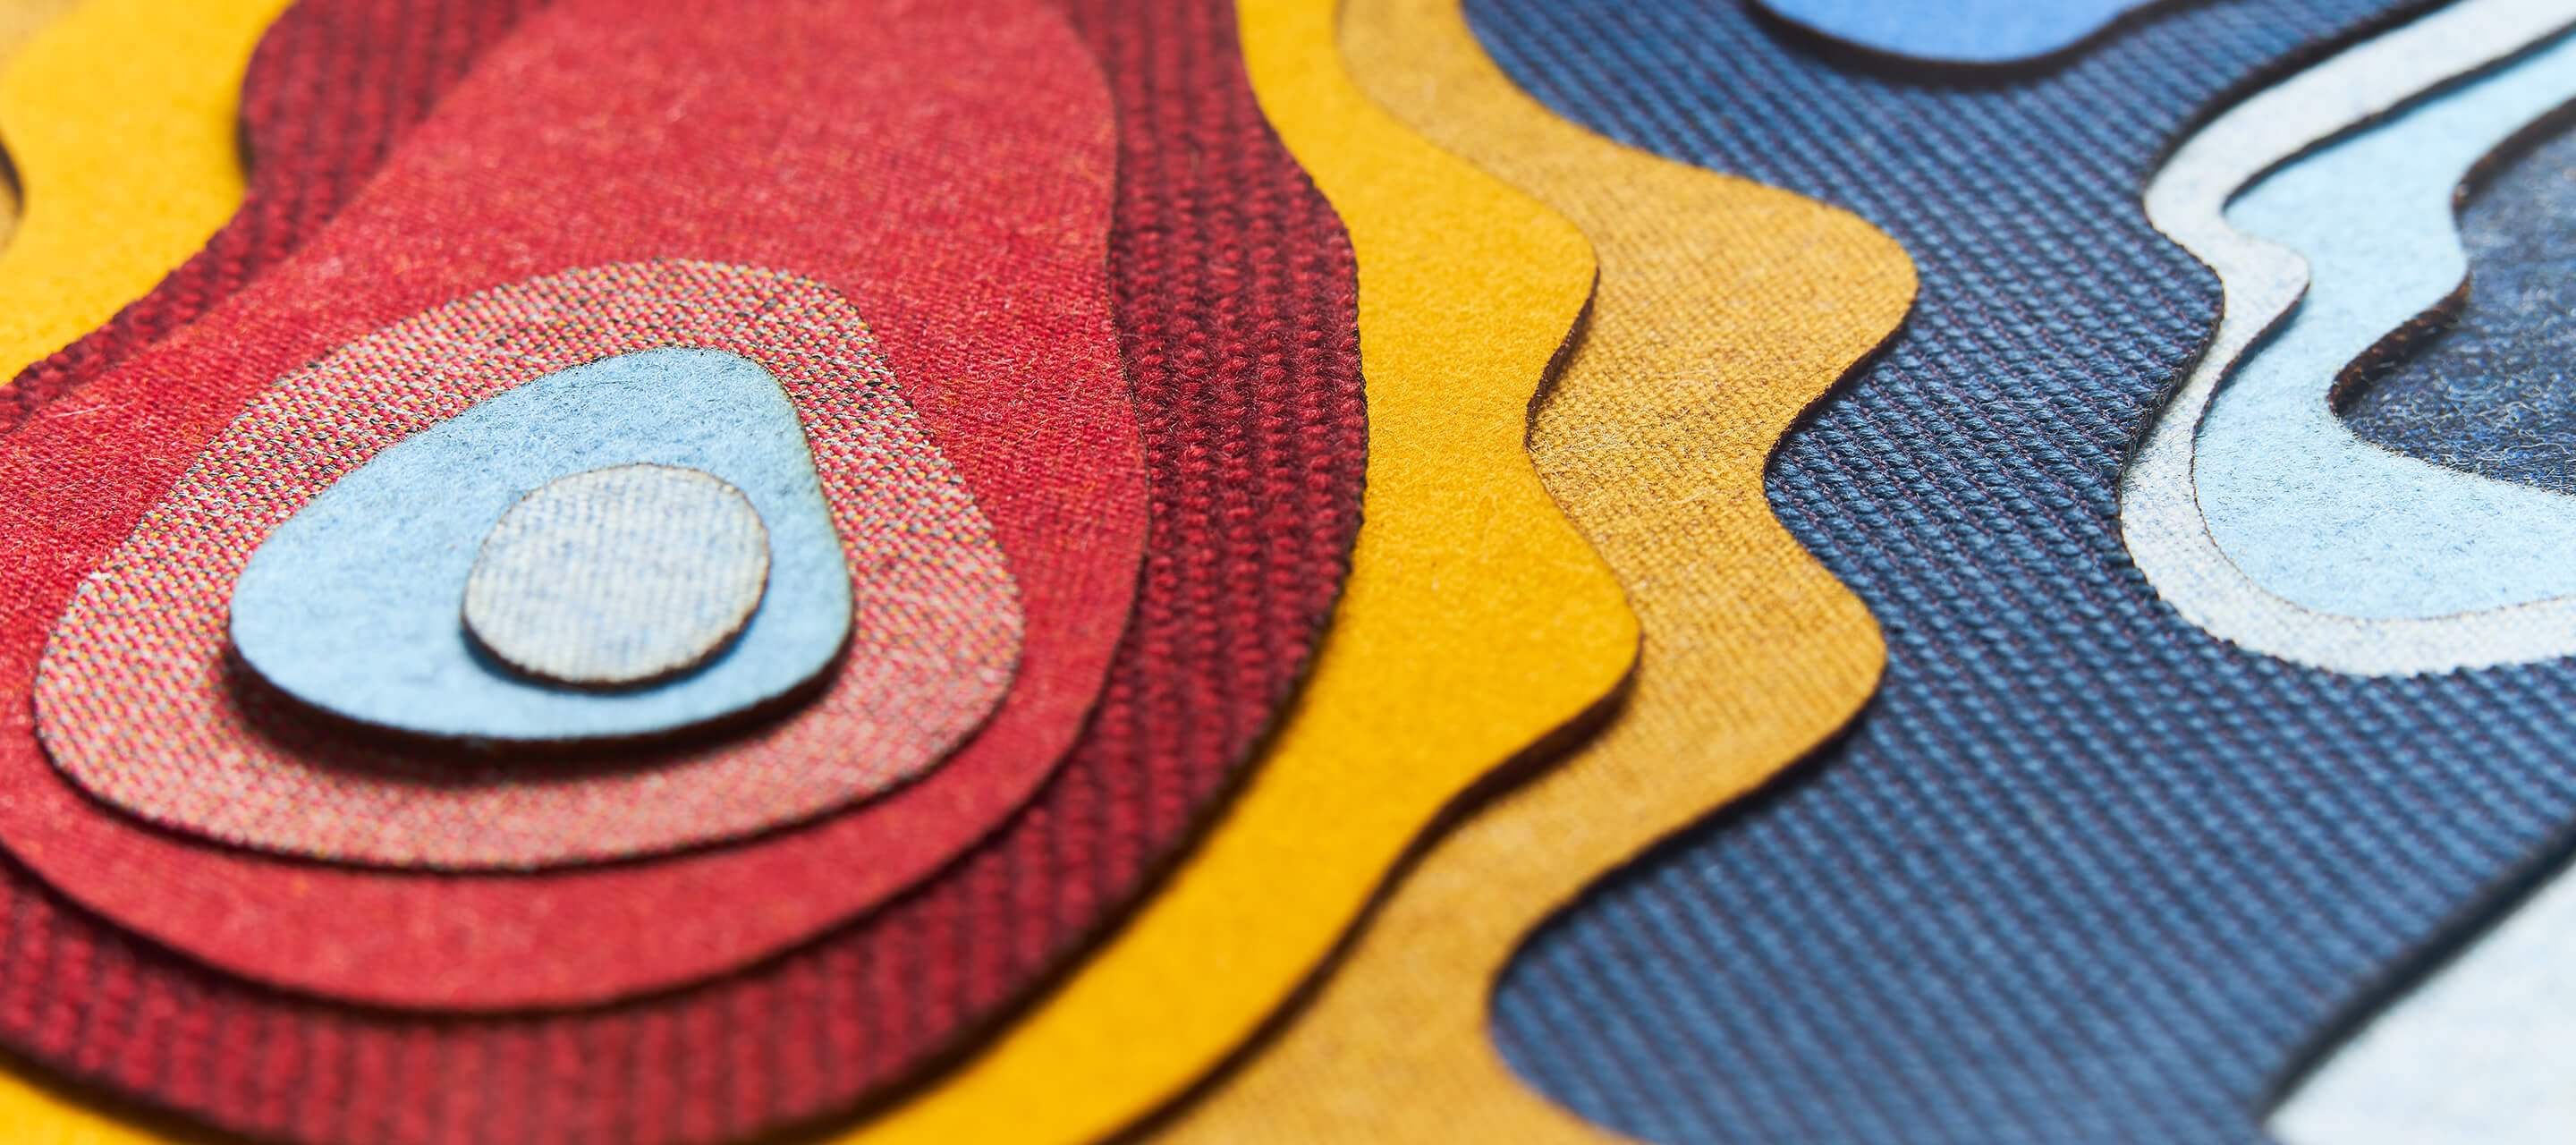 Haworth Kvadrat Banner Surfaces showing small cut outs of fabric in red yellow and blue colors with different patterns